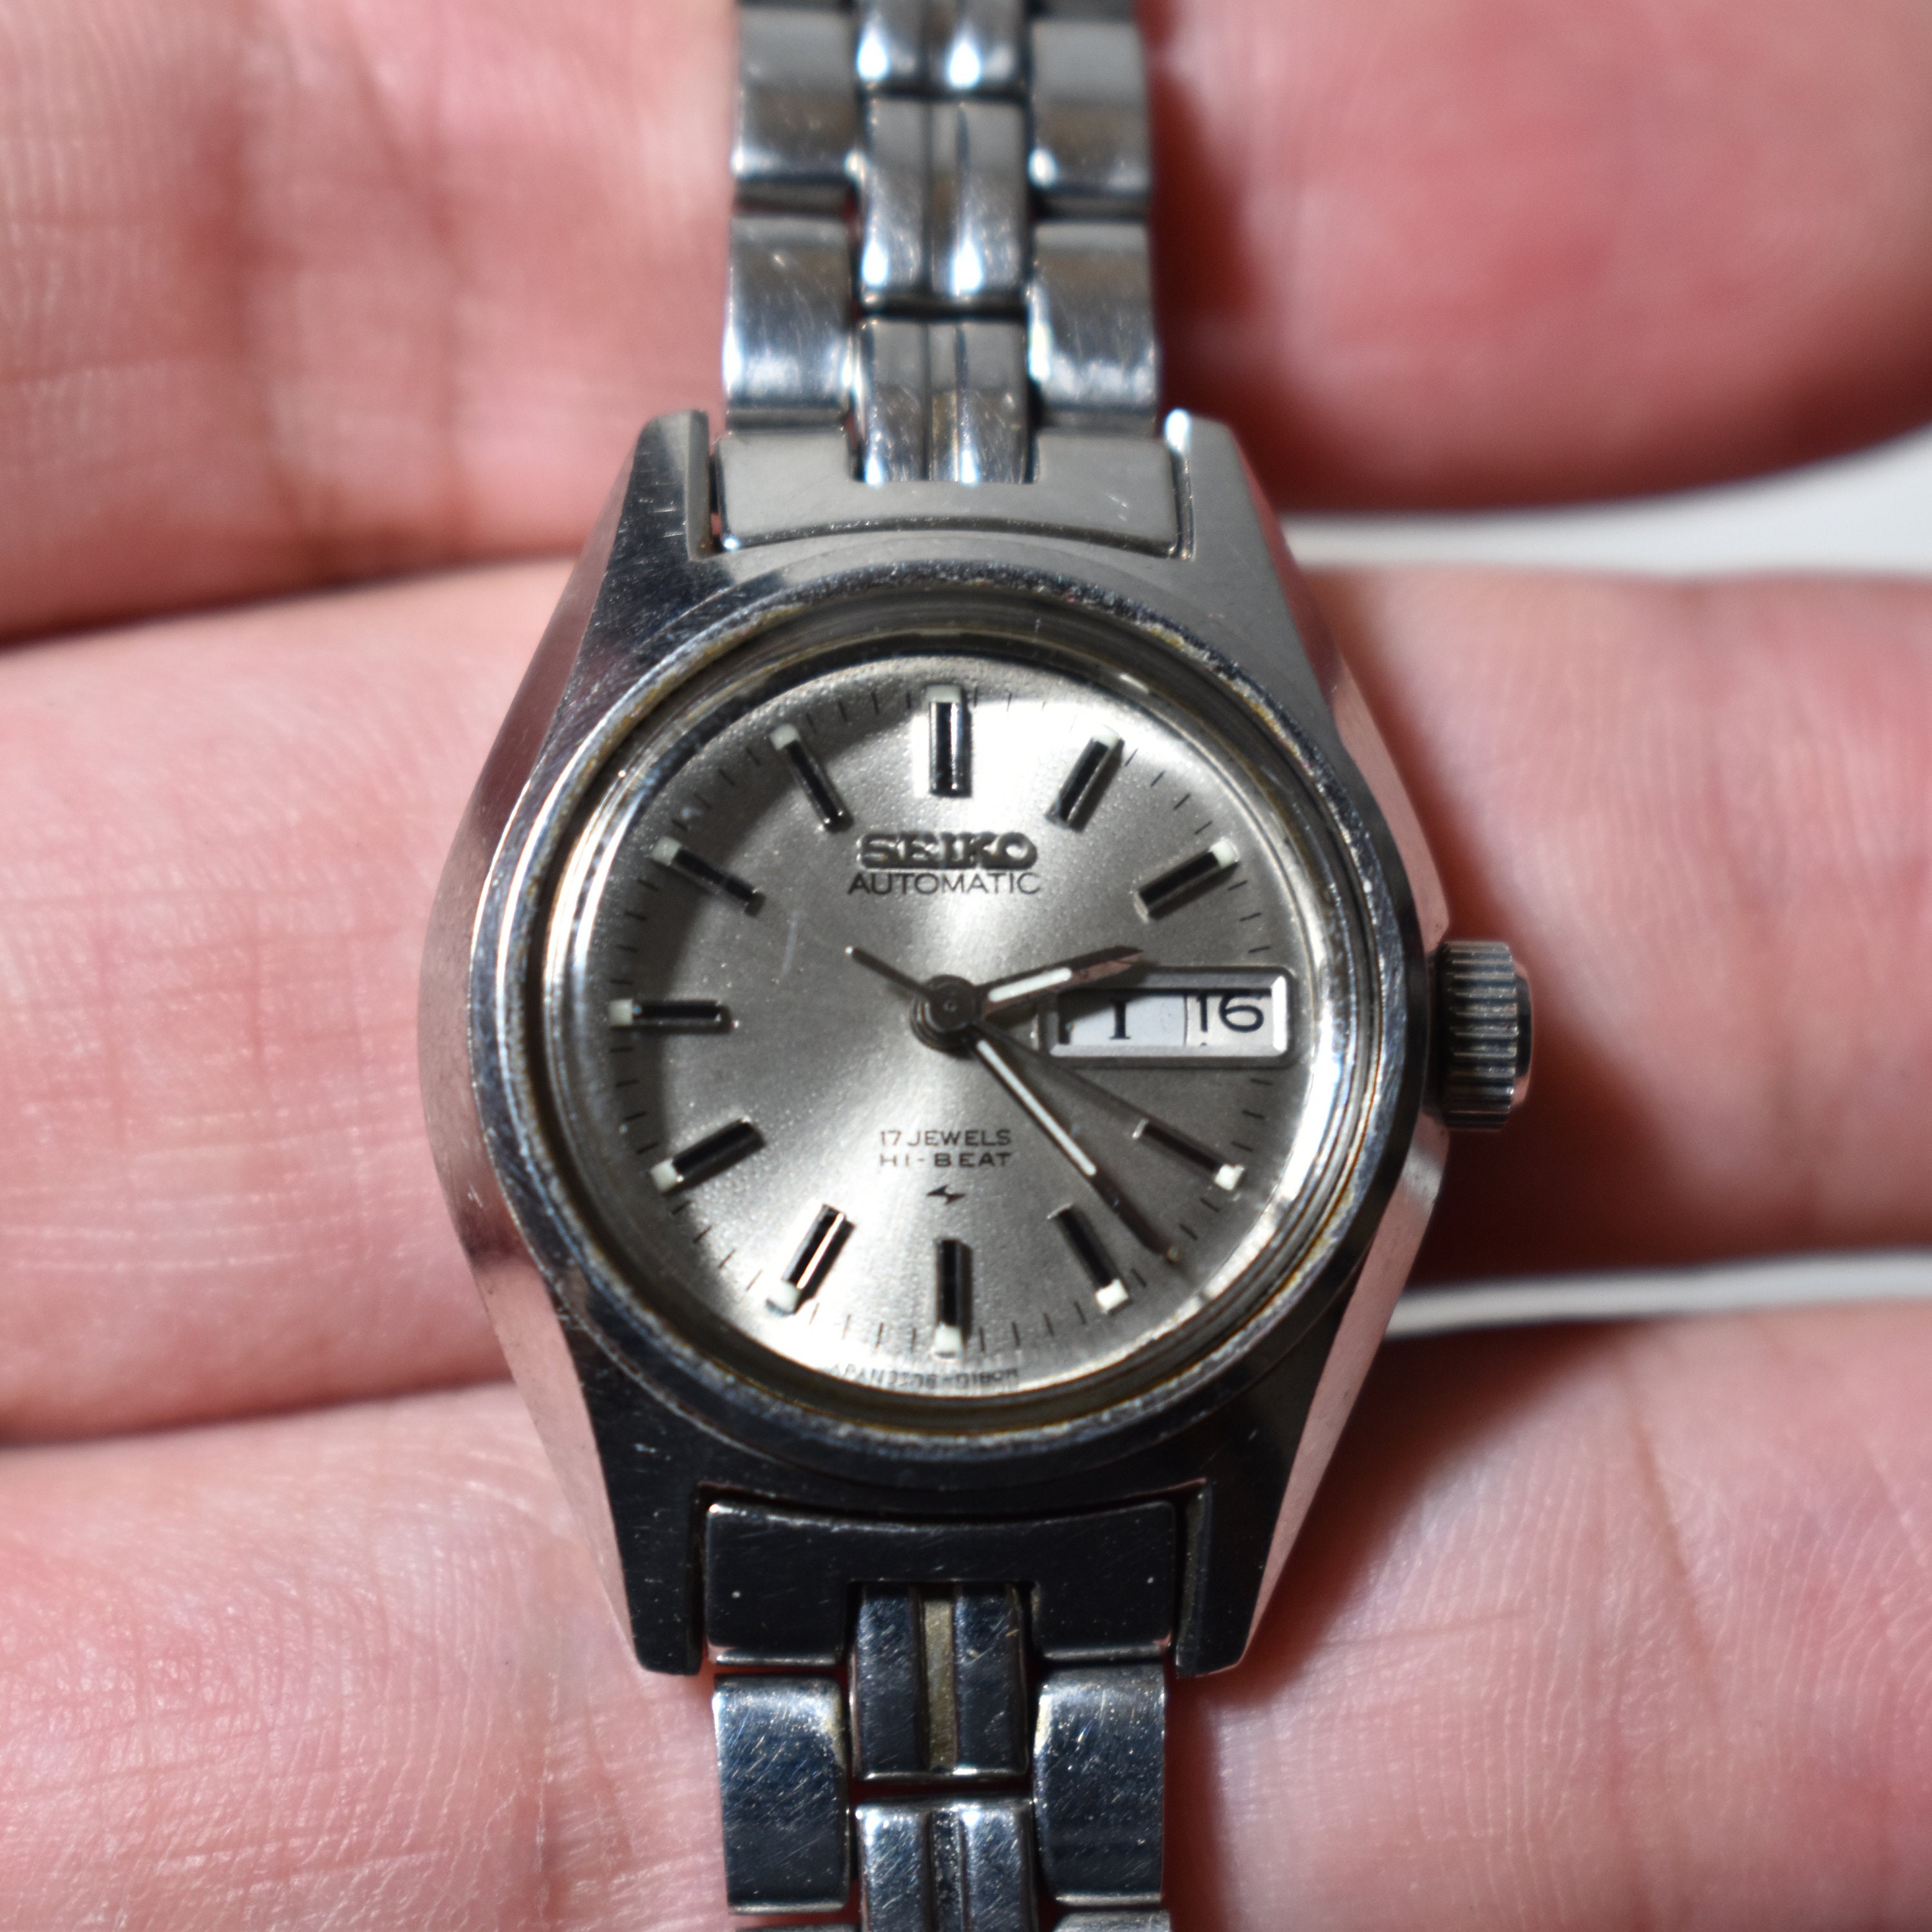 Vintage Seiko Automatic Watch 17 Jewels Hi-beat 2206-0110 Japan Stainless  Steelworking - Etsy